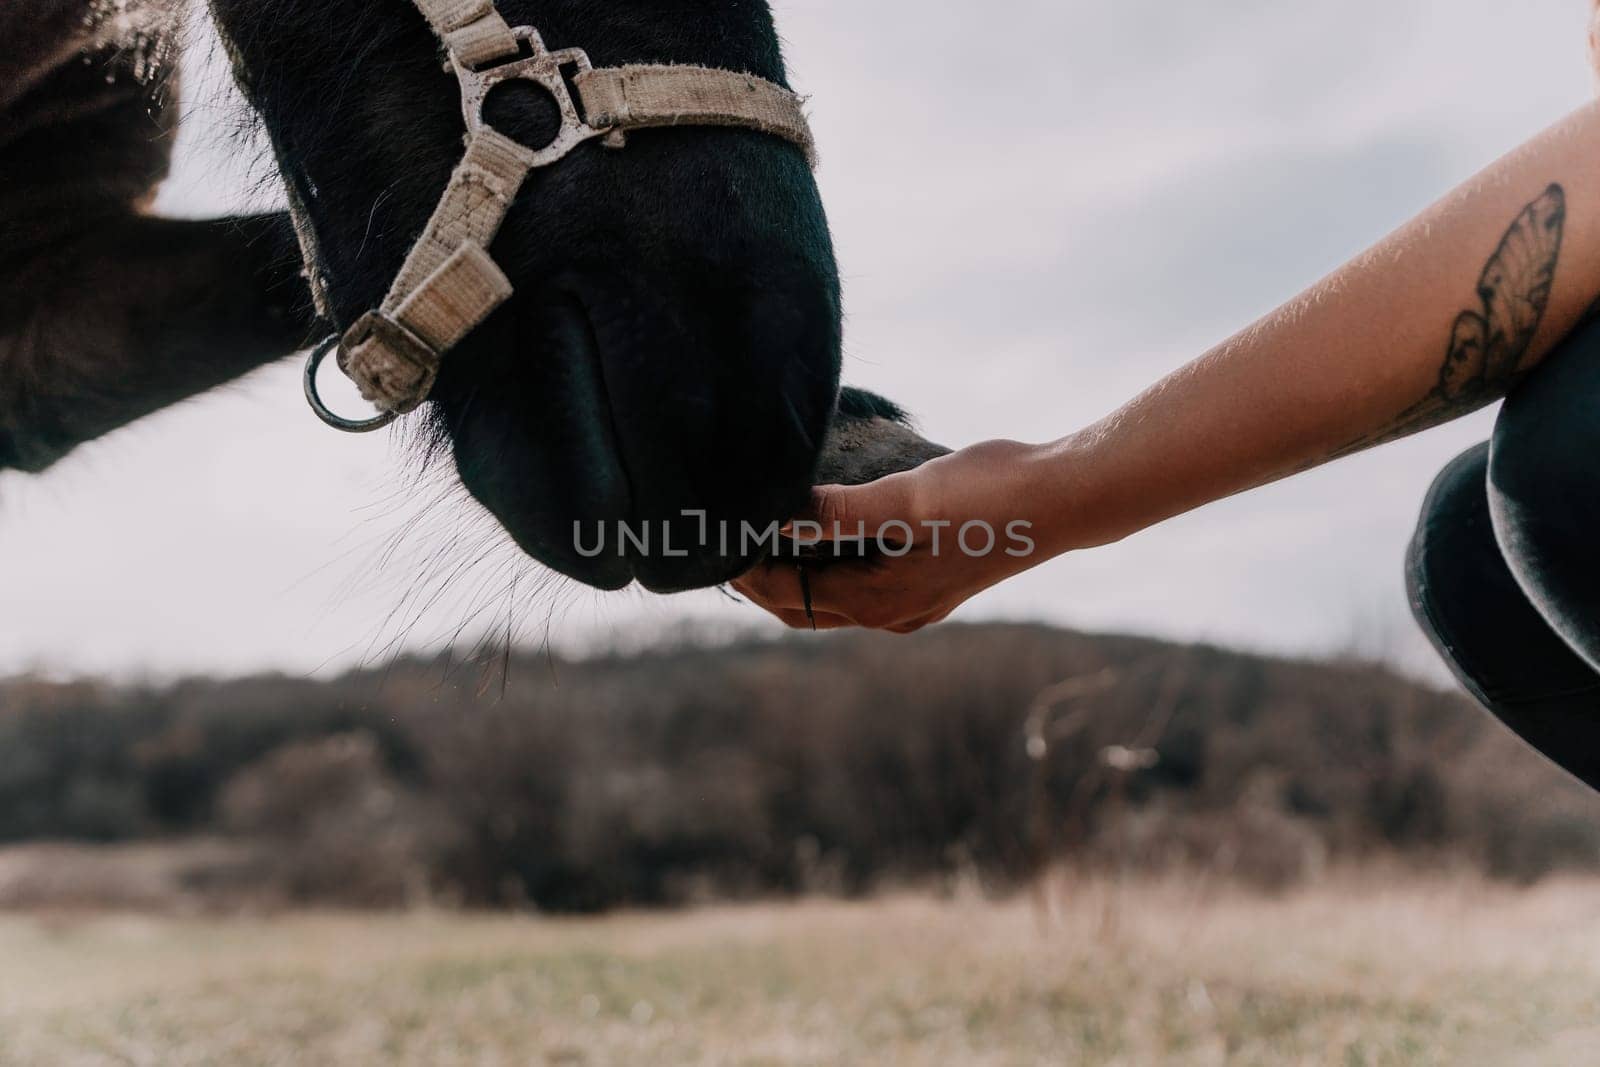 Cute happy young woman with horse. Rider female drives her horse in nature on evening sunset light background. Concept of outdoor riding, sports and recreation.